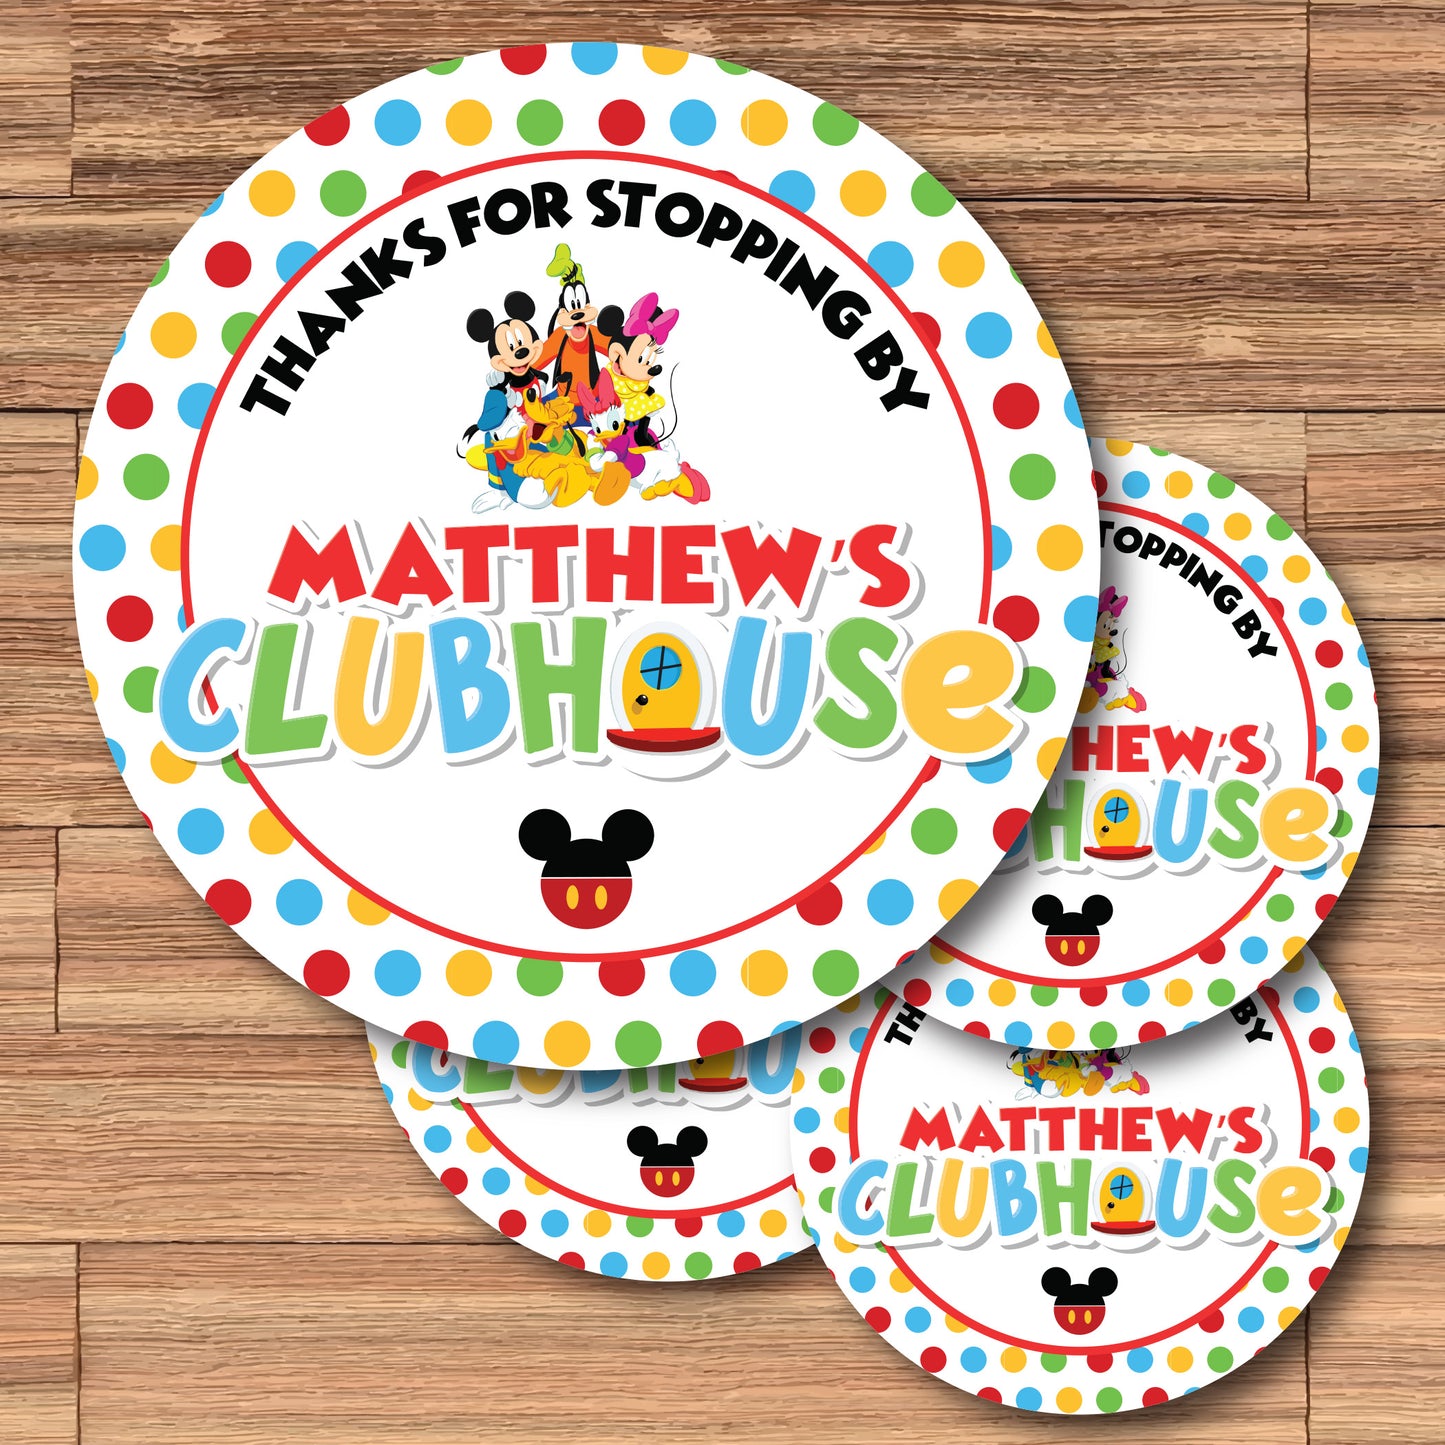 MICKEY MOUSE CLUBHOUSE Personalized Stickers for Gift Bags, Party Favors! Printed or Digital